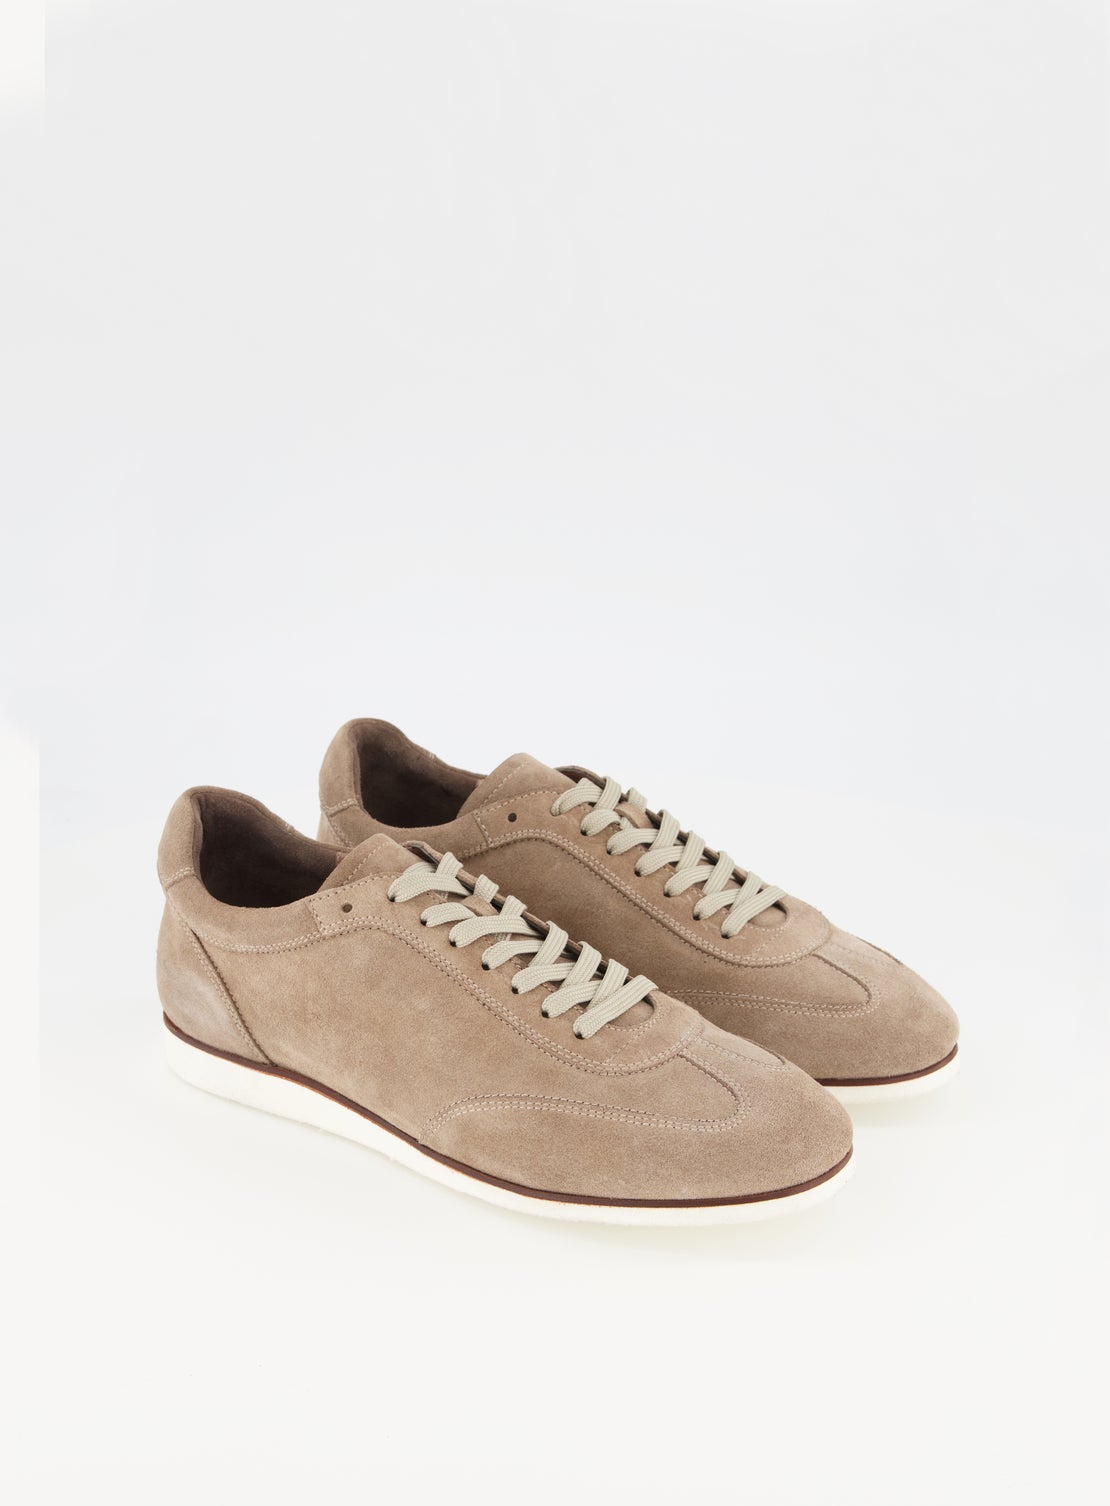 Taylor Khaki Suede Sneaker With White Sole